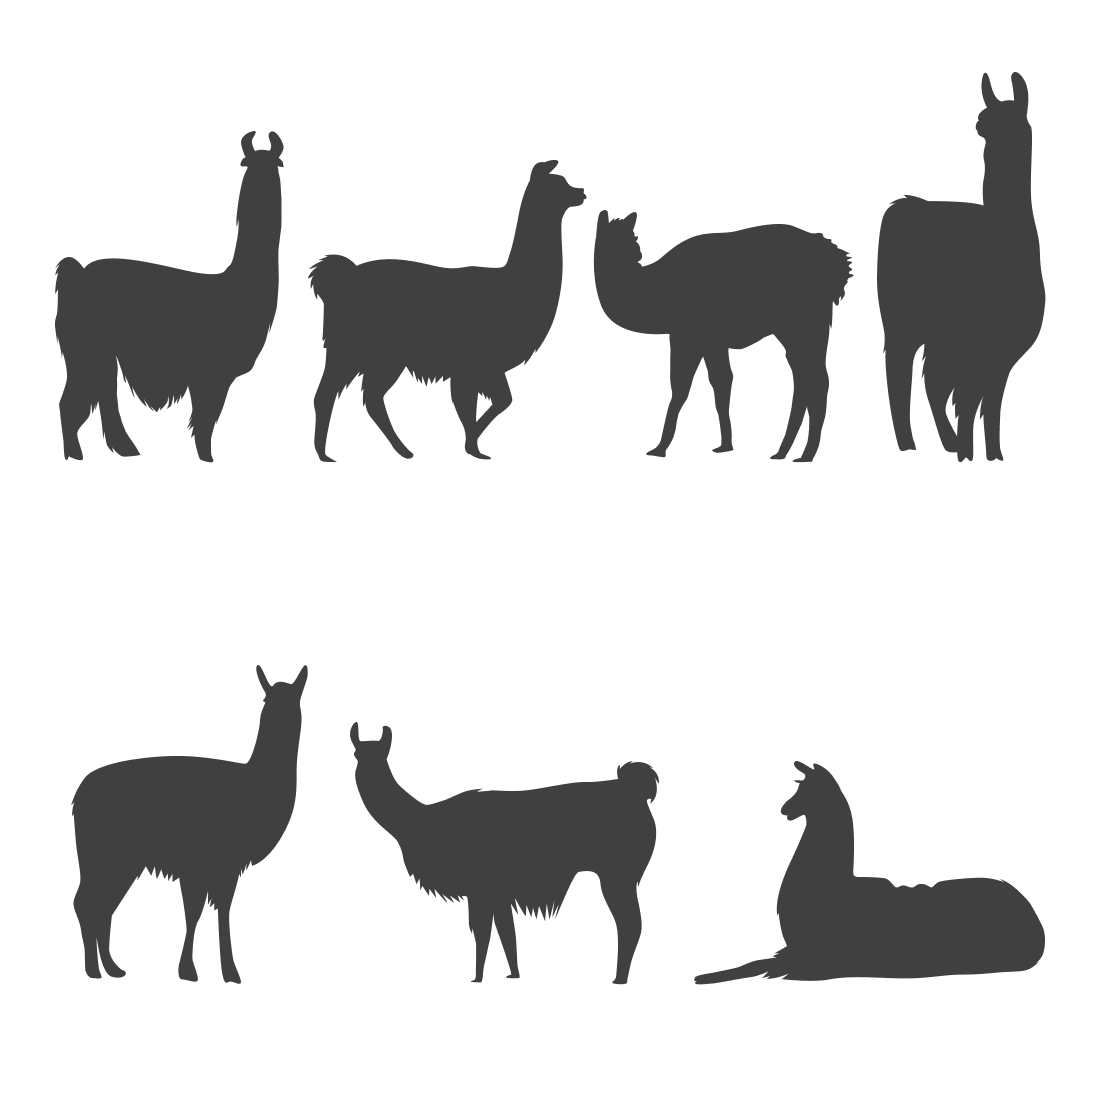 Llamas and llamas silhouettes on a white background.